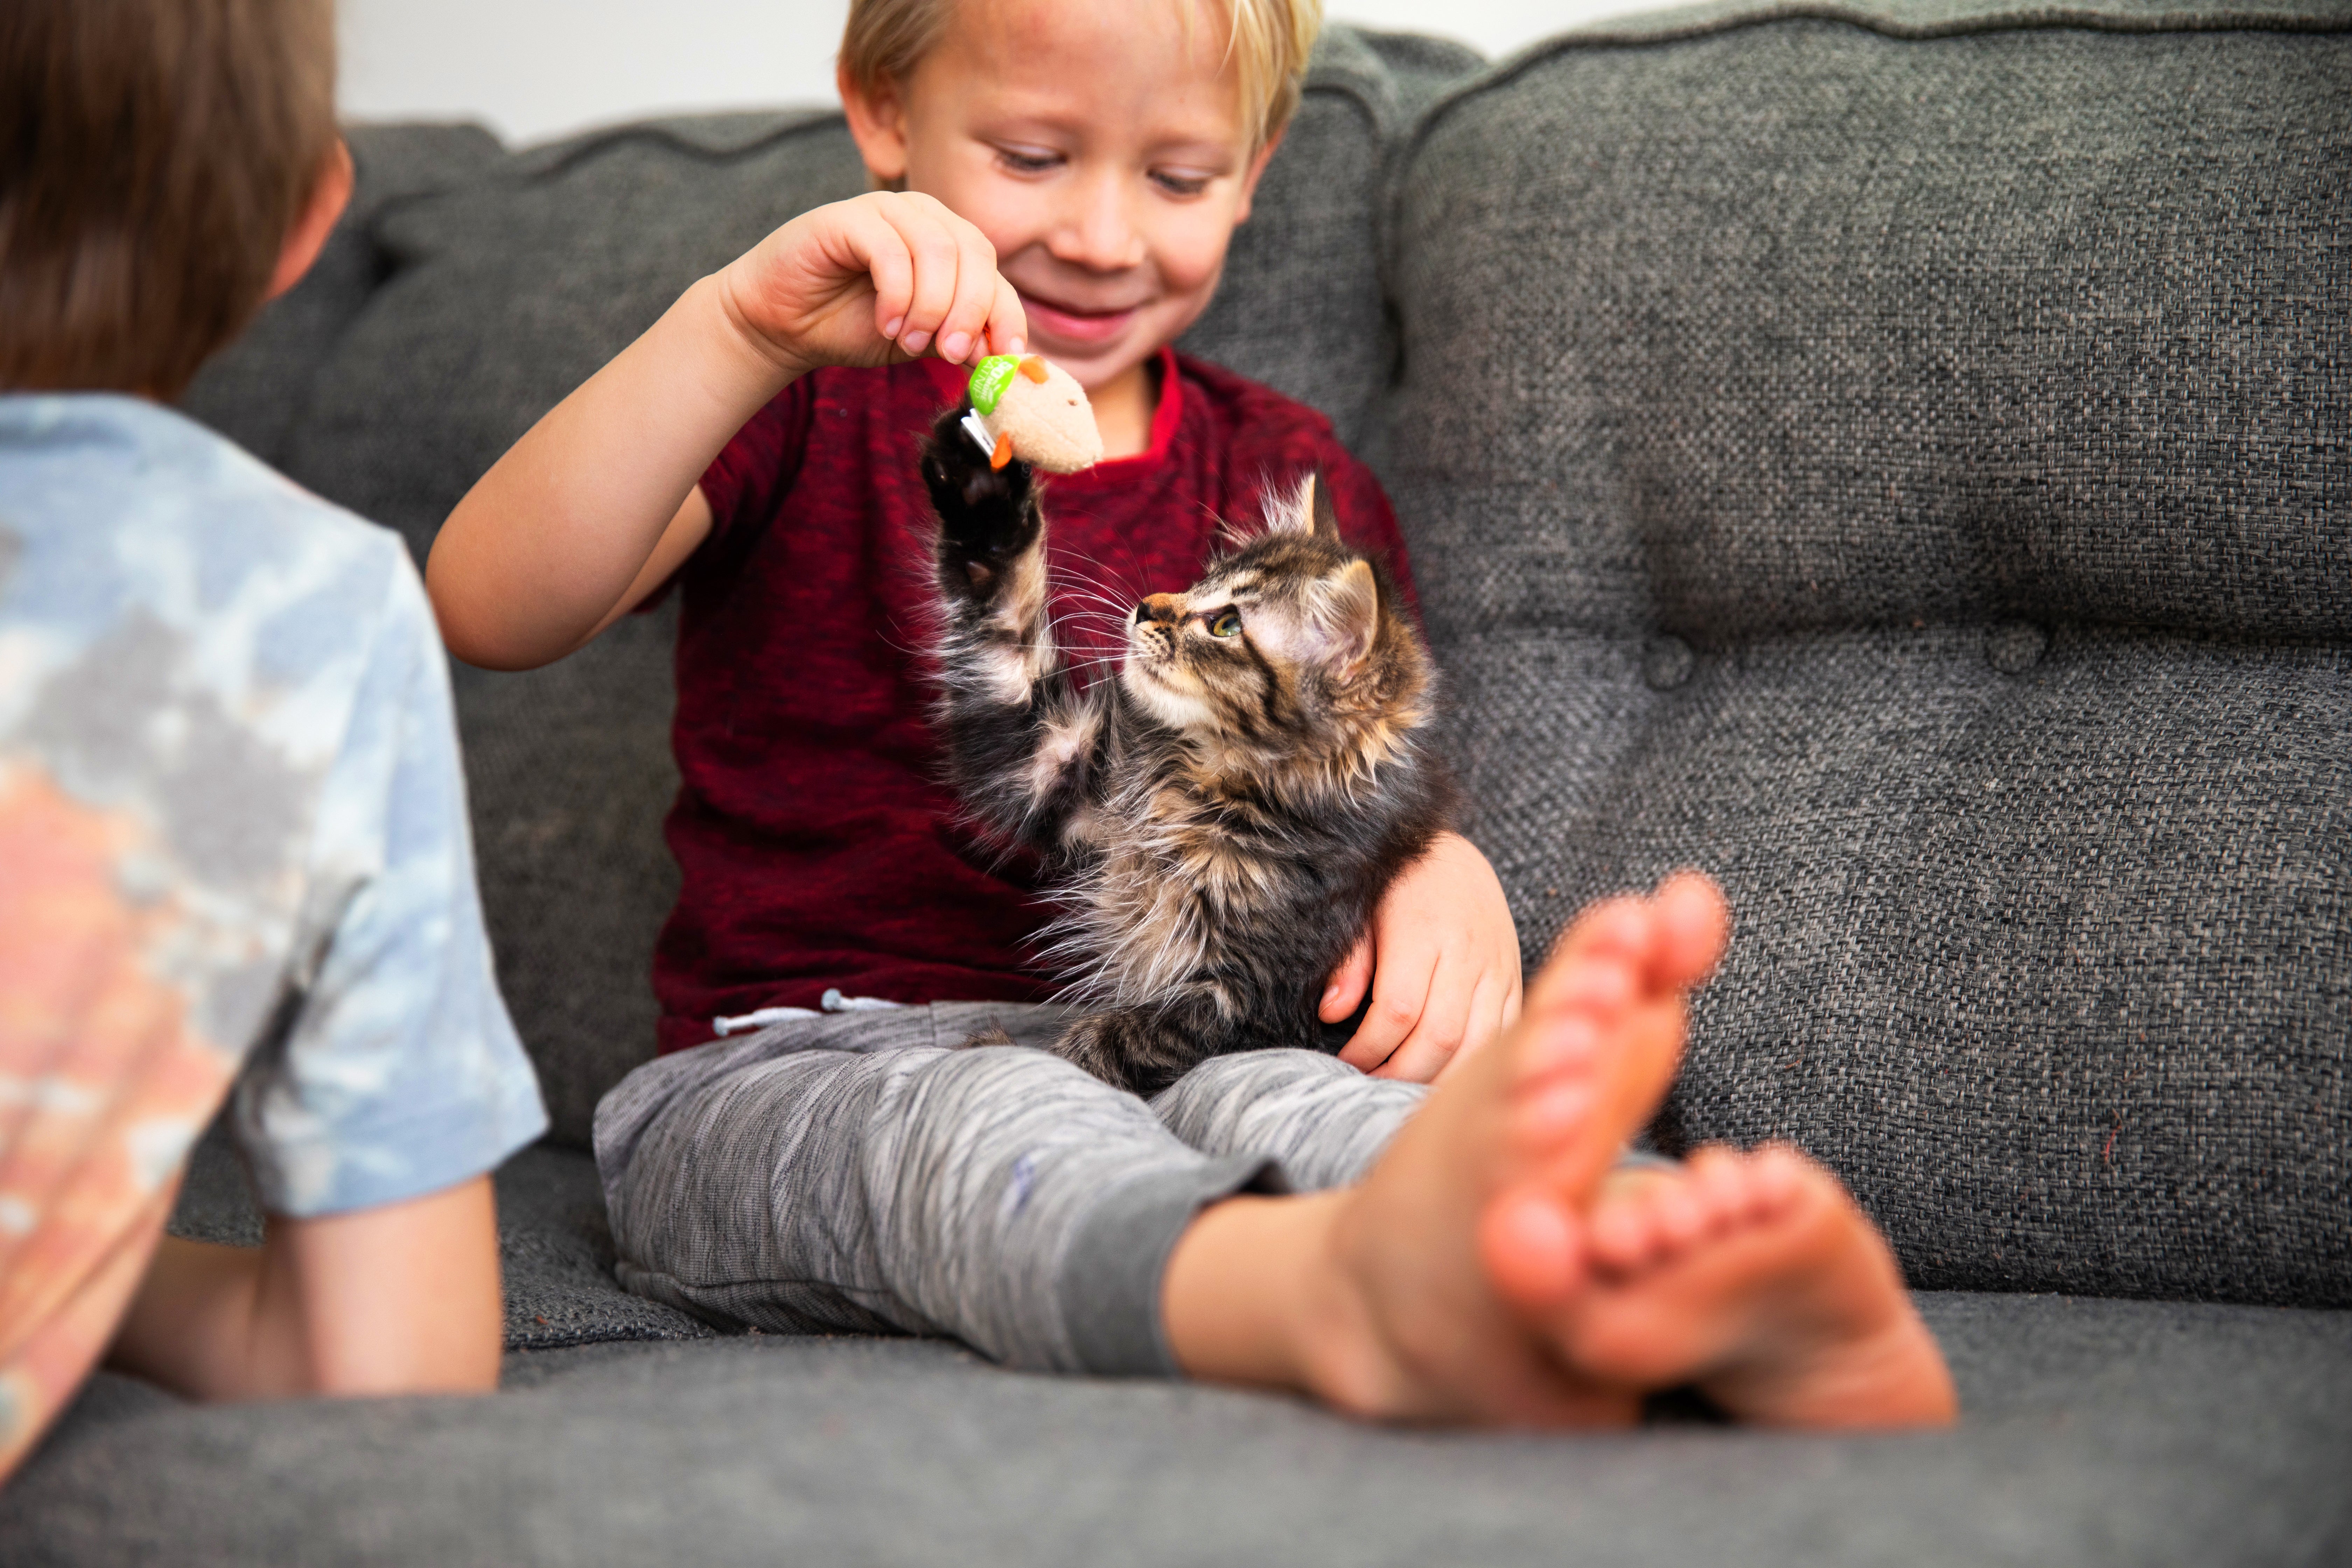 Kitten playing with a person on a couch in a home